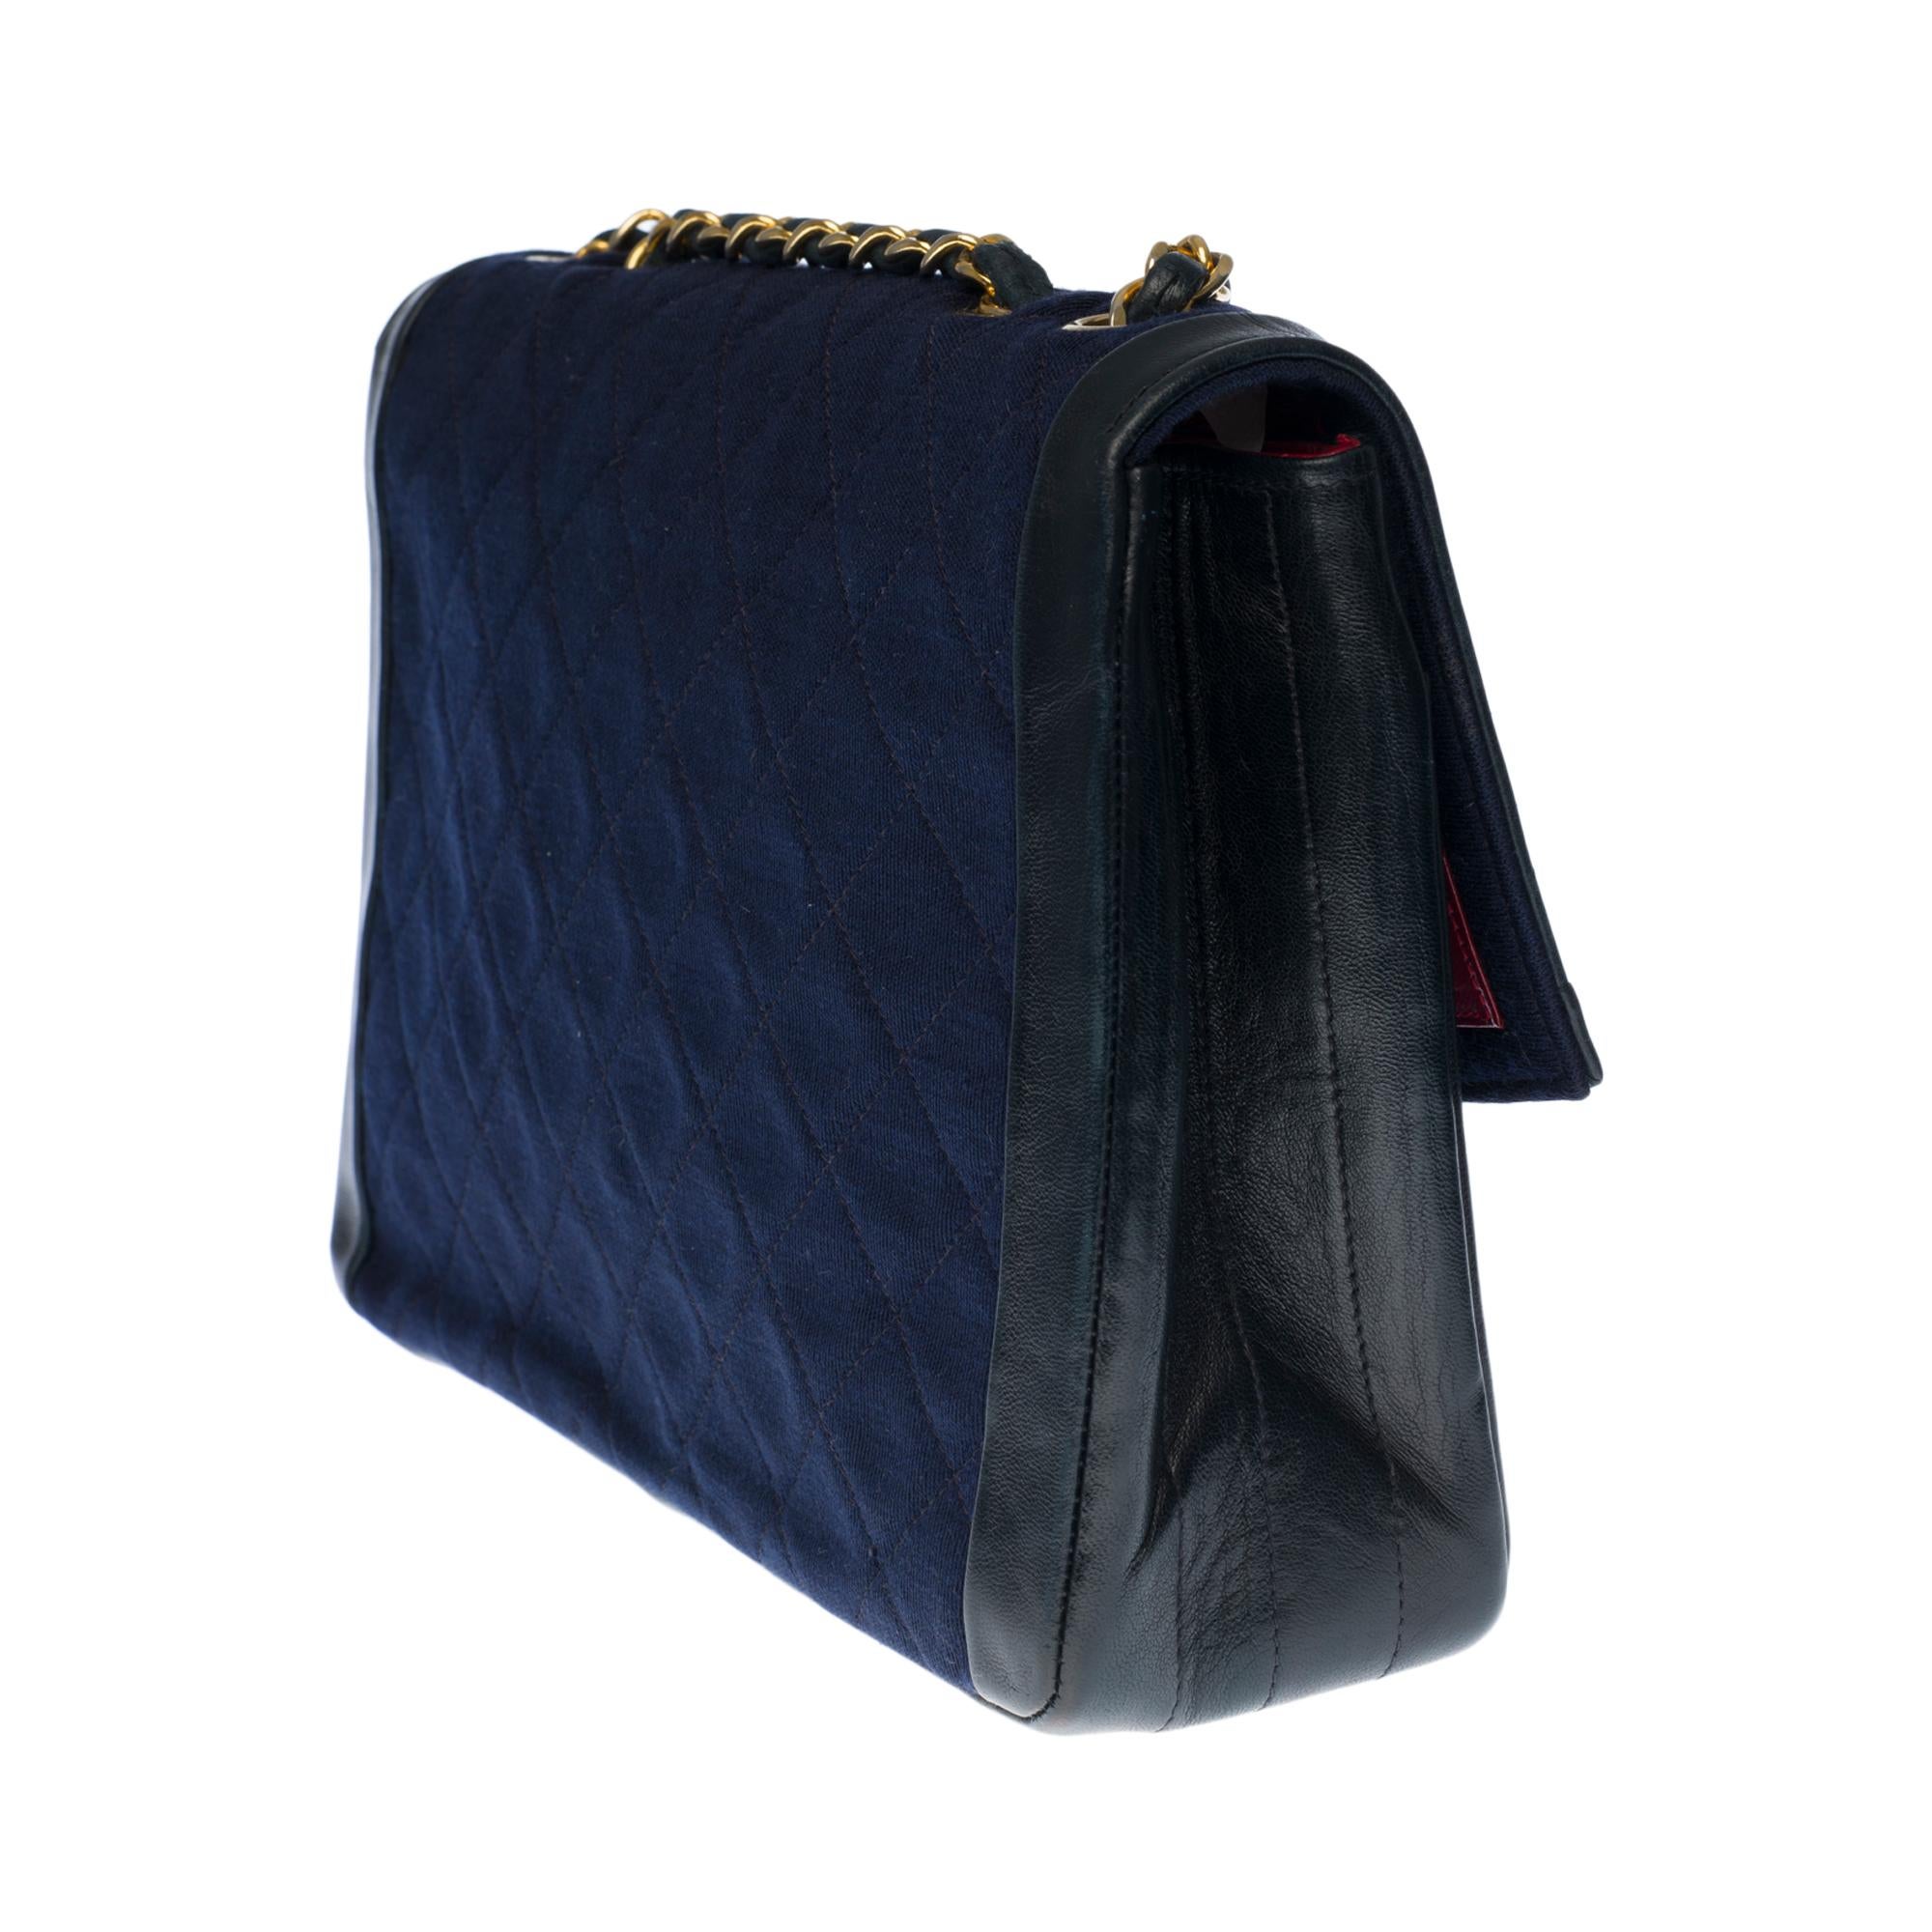 Black Chanel Classique two-material bag in navy blue quilted jersey and leather, GHW